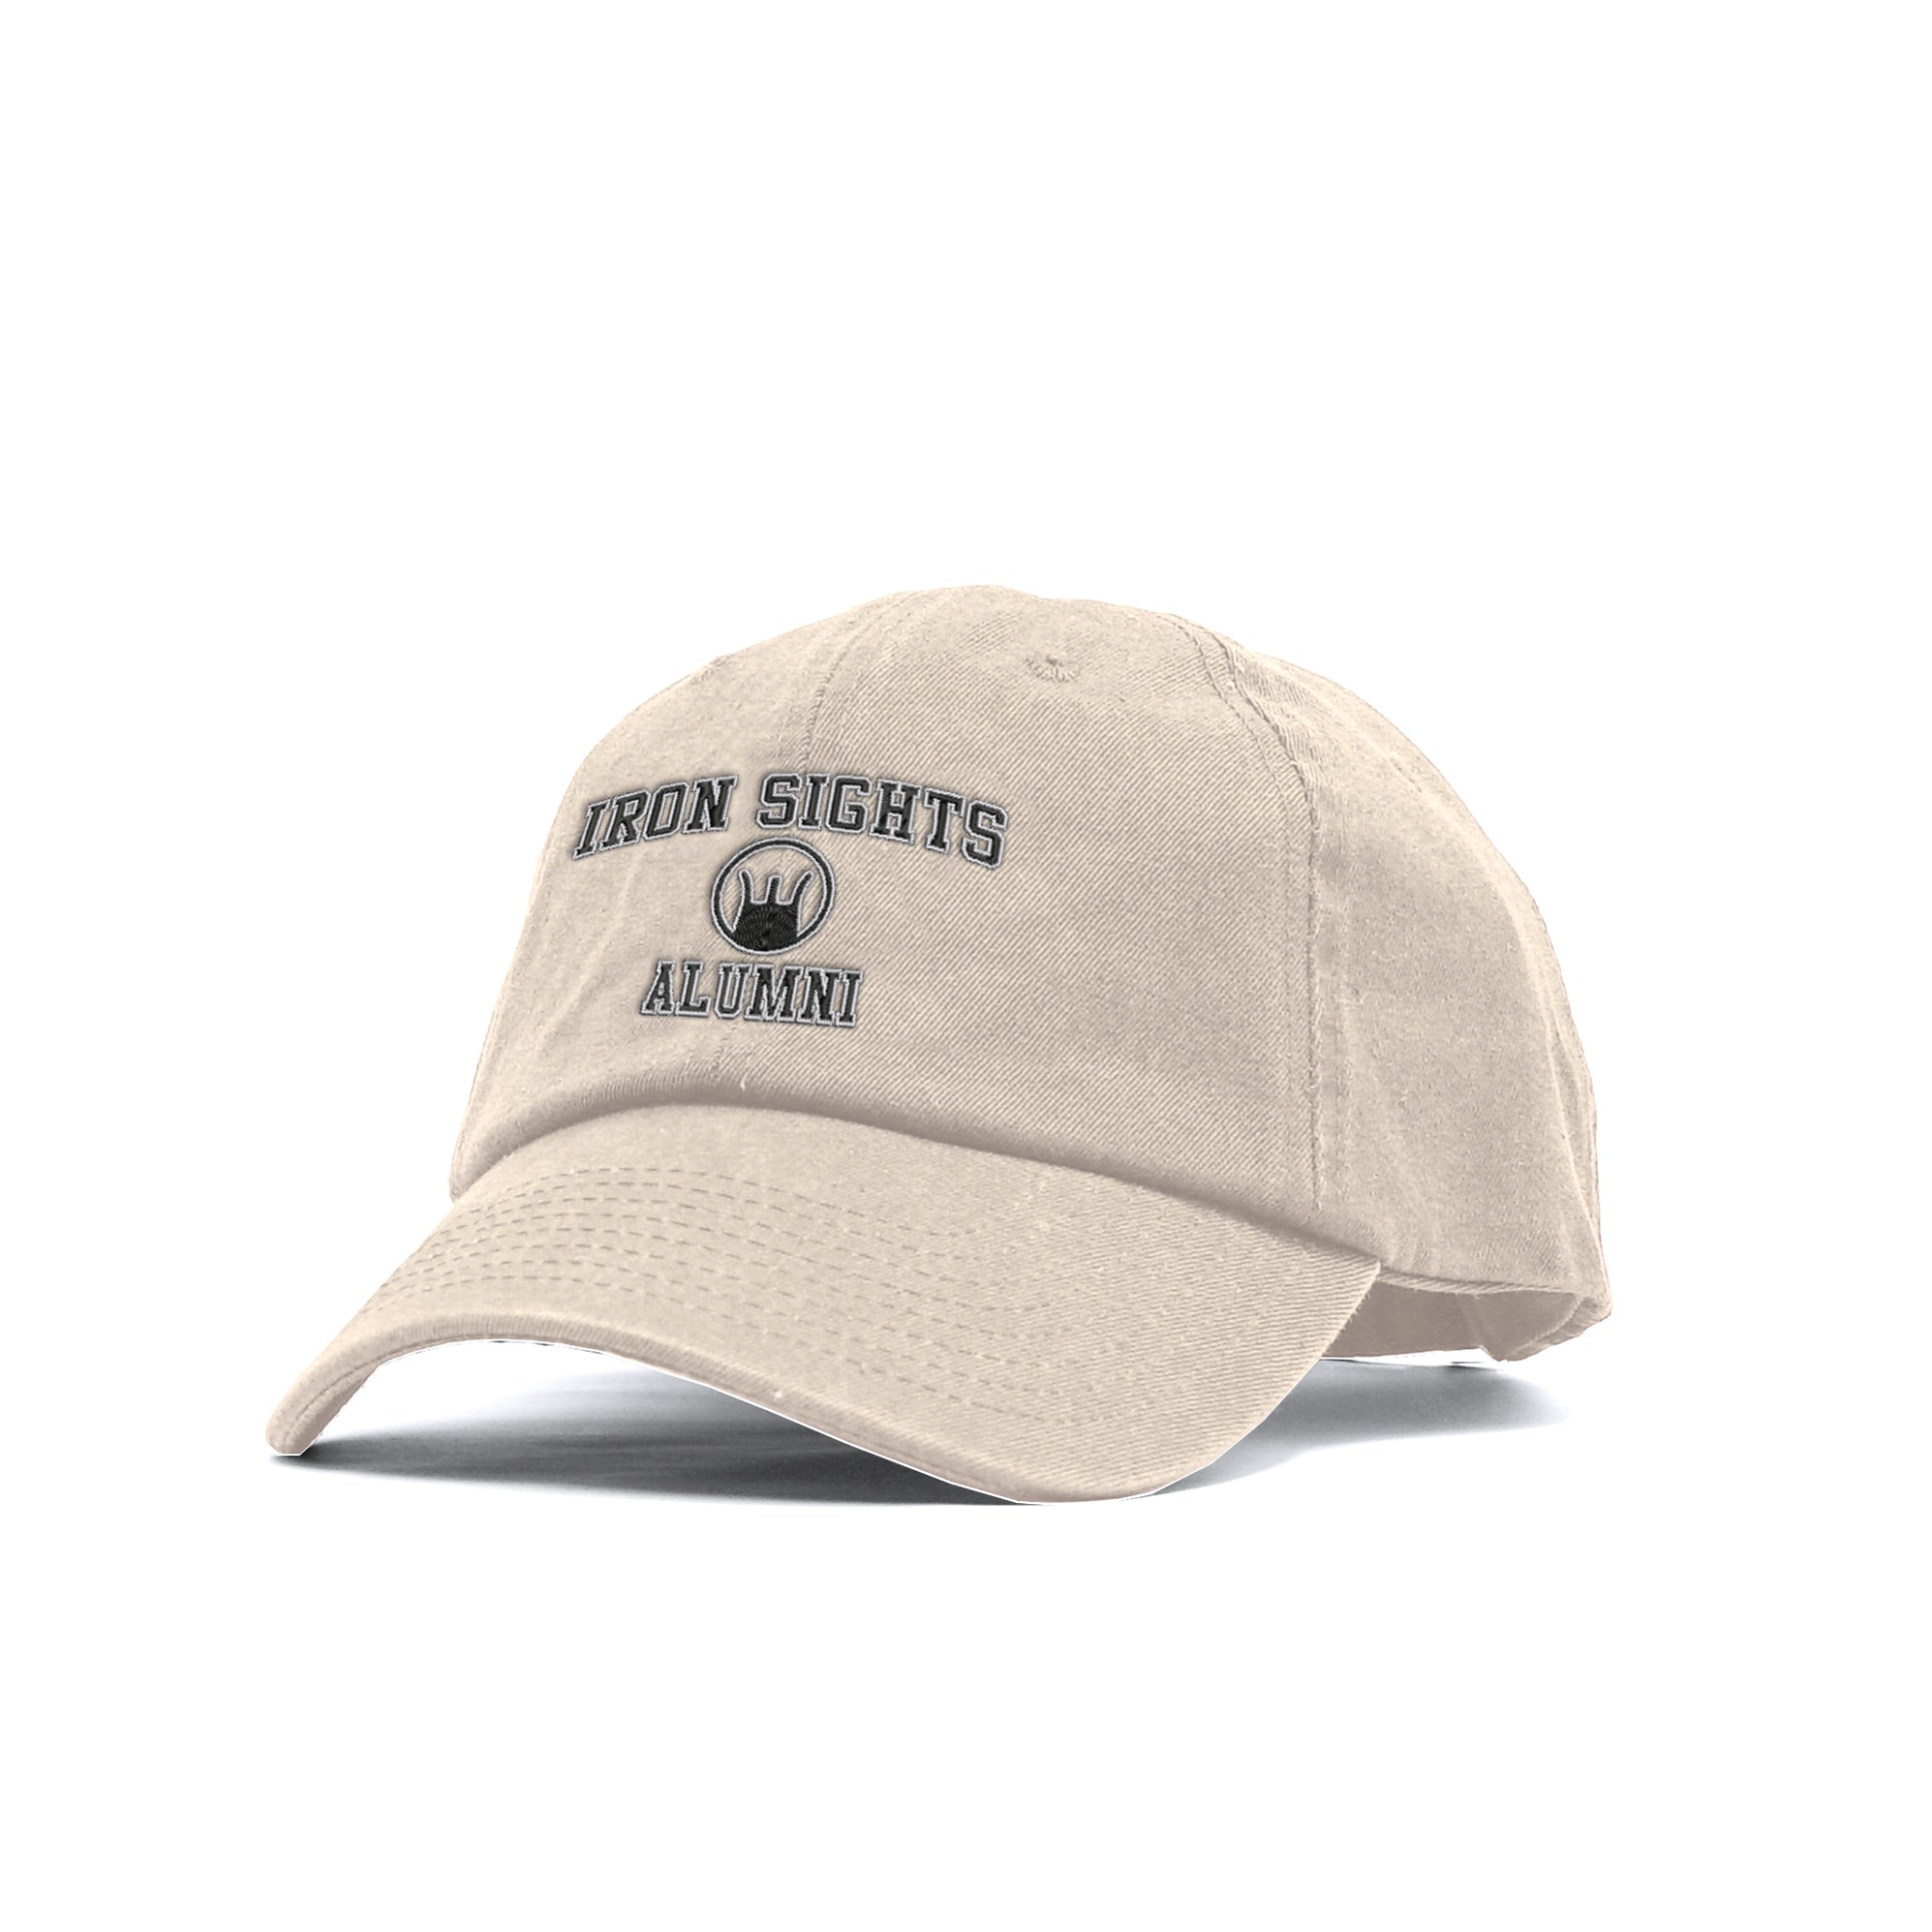 IRON SIGHTS ALUMNI UNSTRUCTURED HAT — Leatherneck For Life